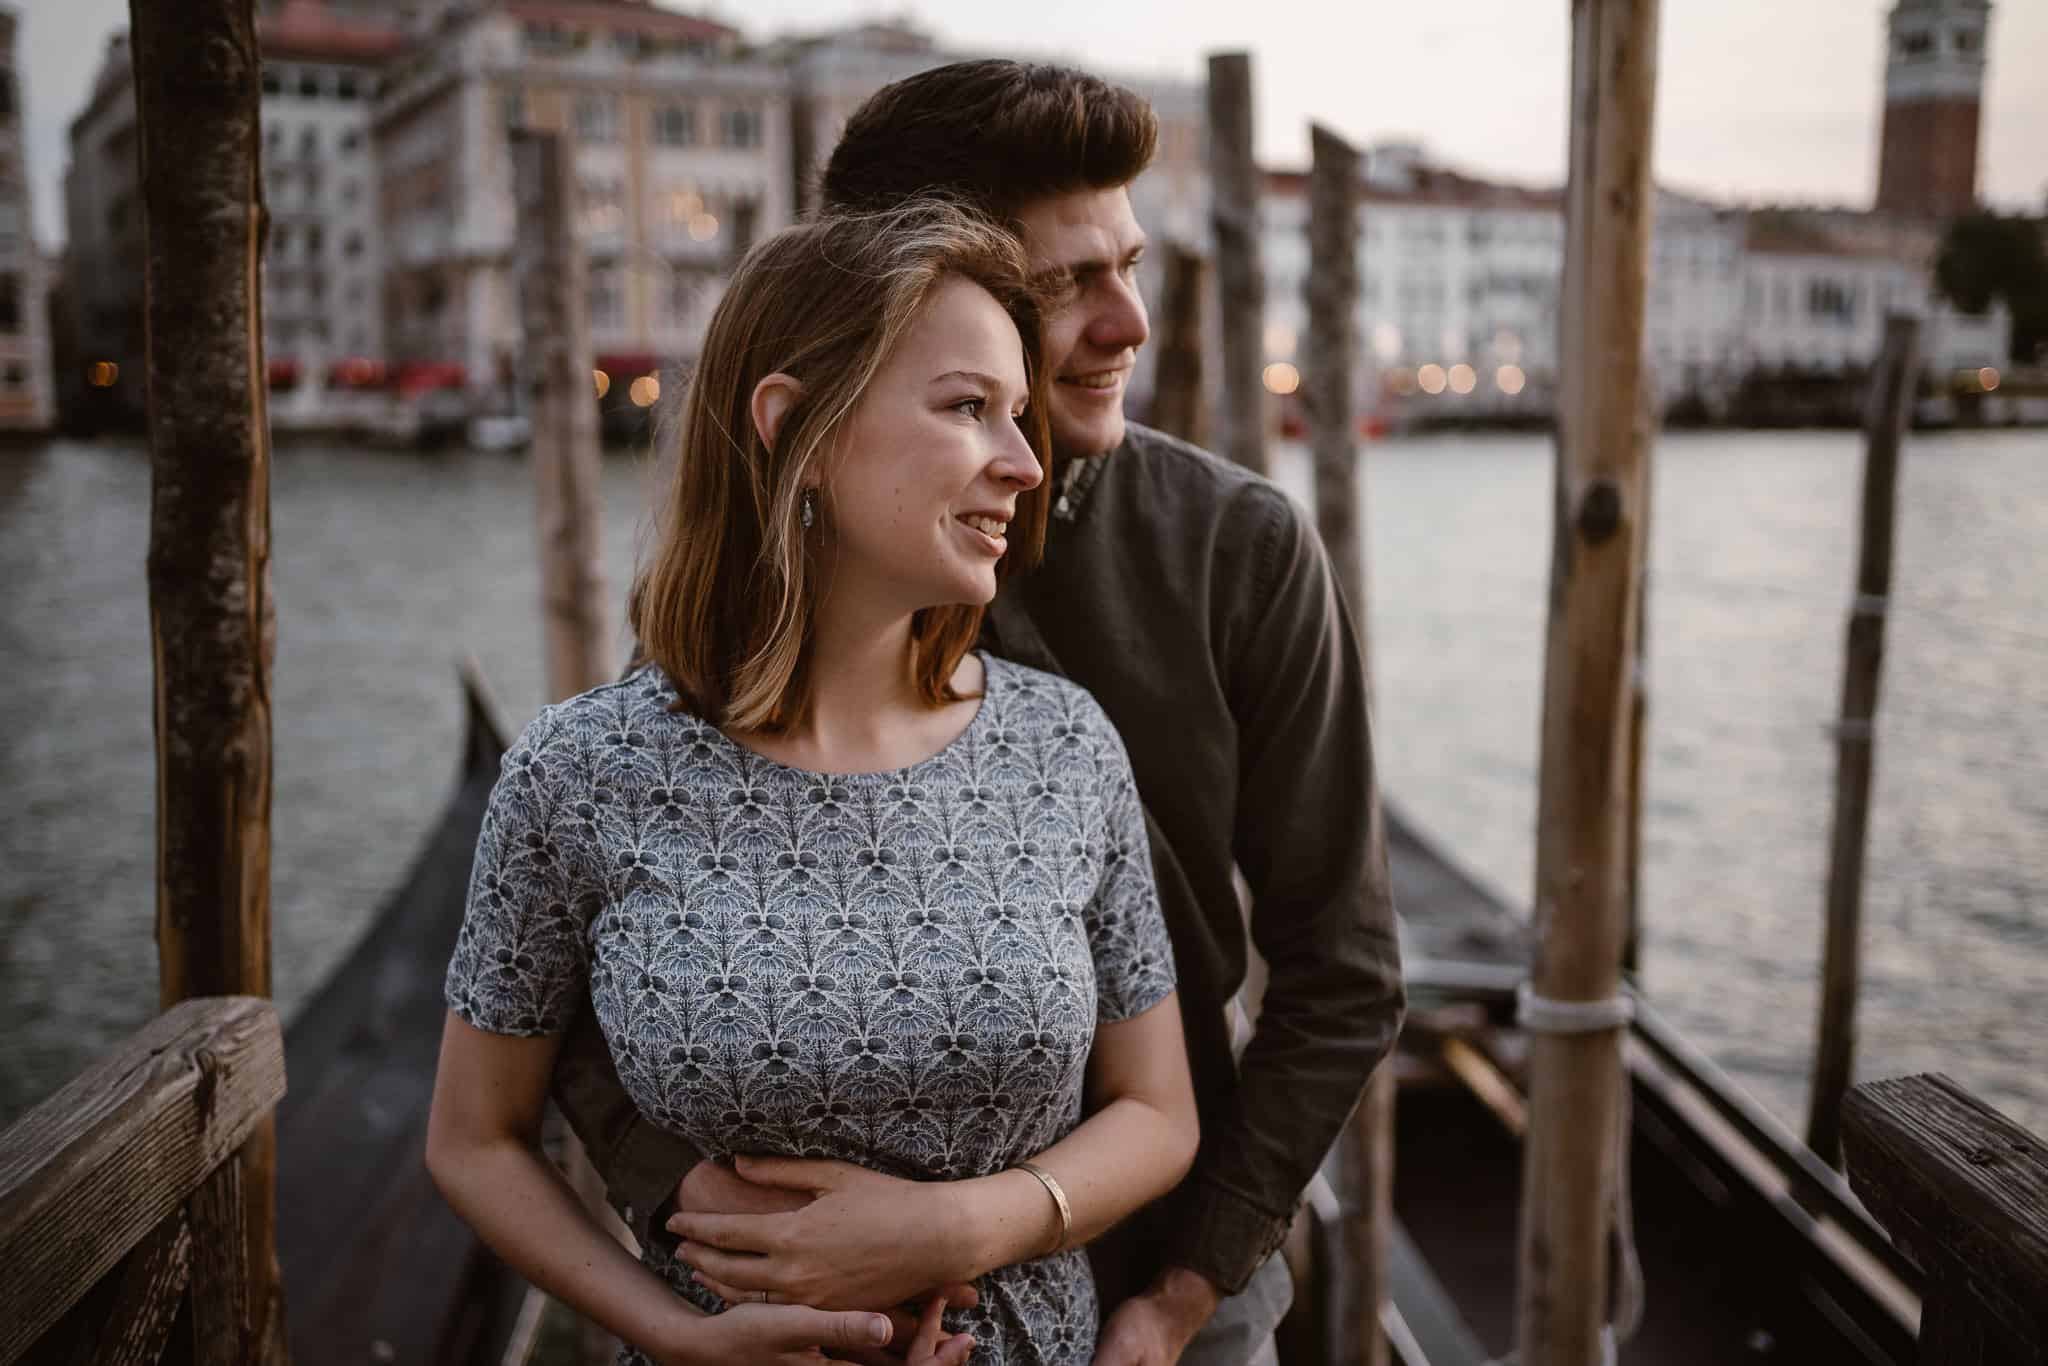 Couple engagement in Venice at sunrise